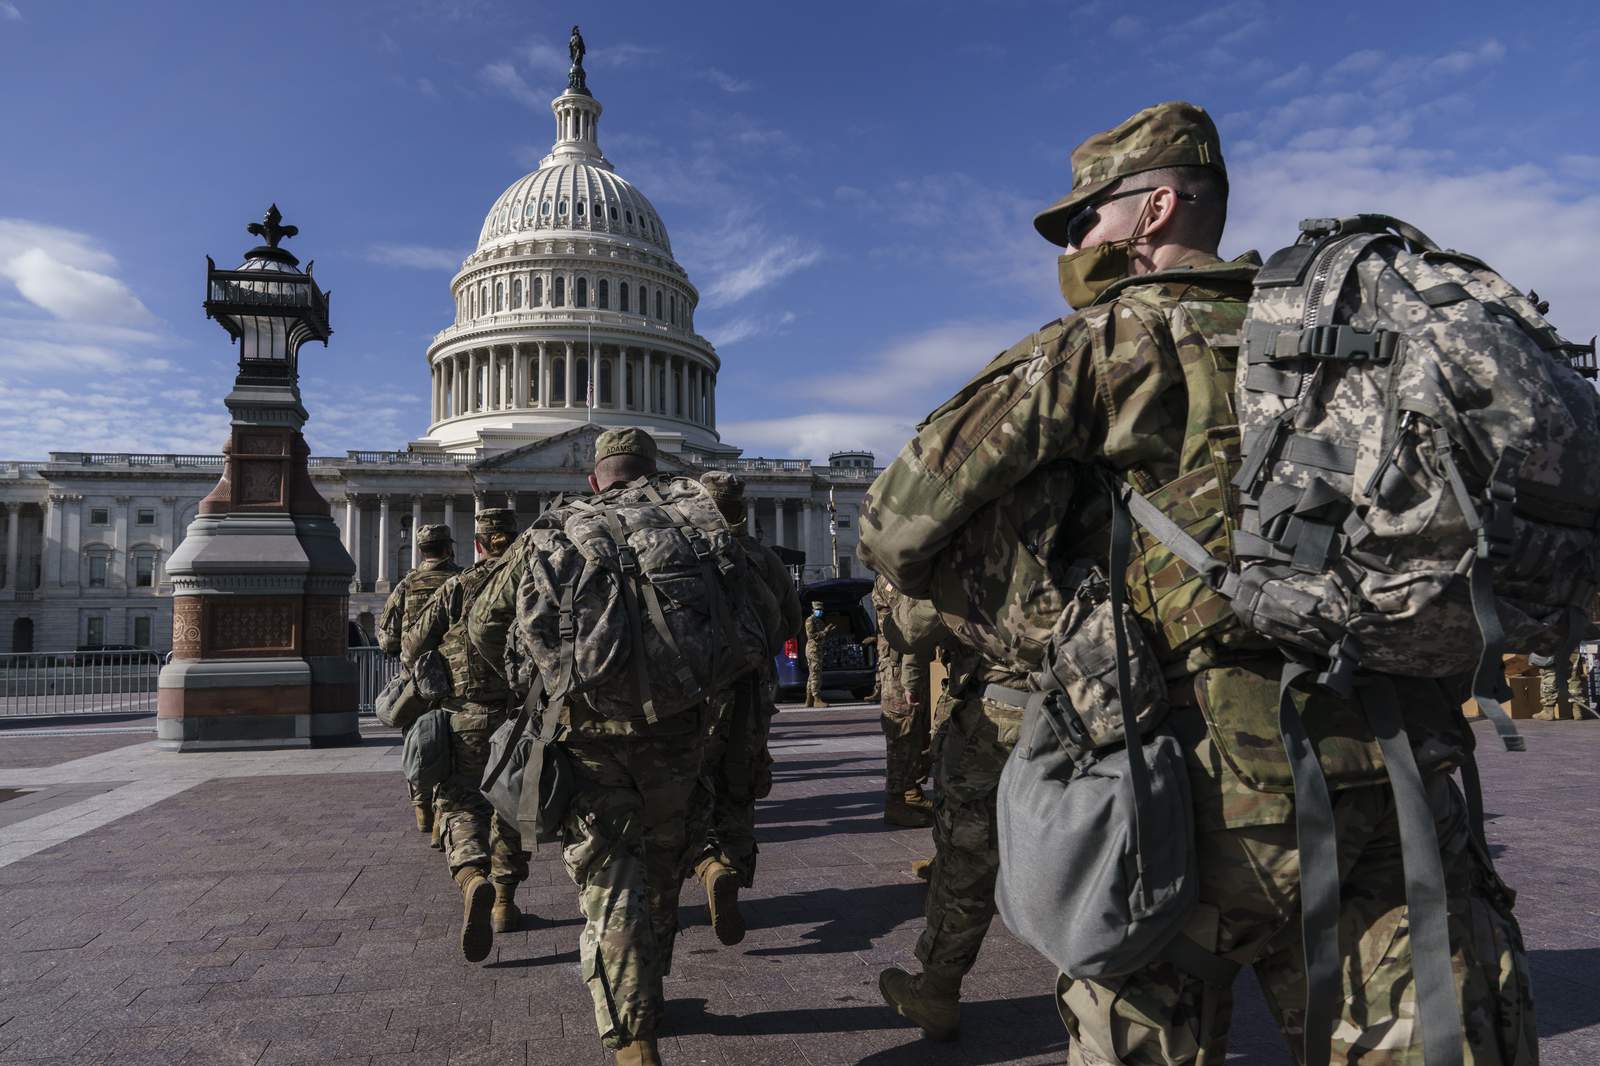 FBI vetting National Guard troops in DC amid fears of insider attack